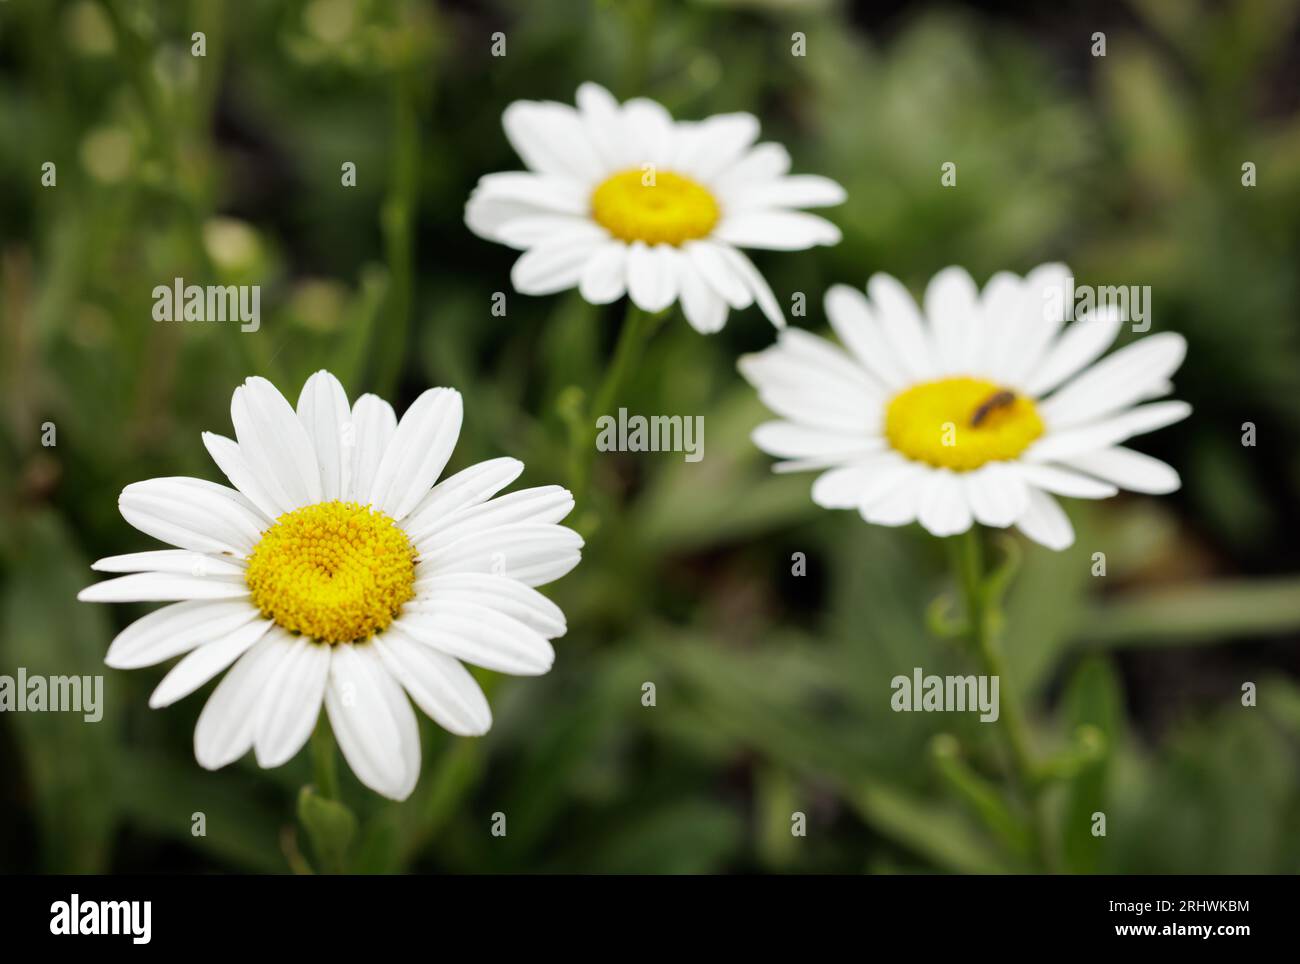 The pure white blooms of the daisies on a summer afternoon. Stock Photo